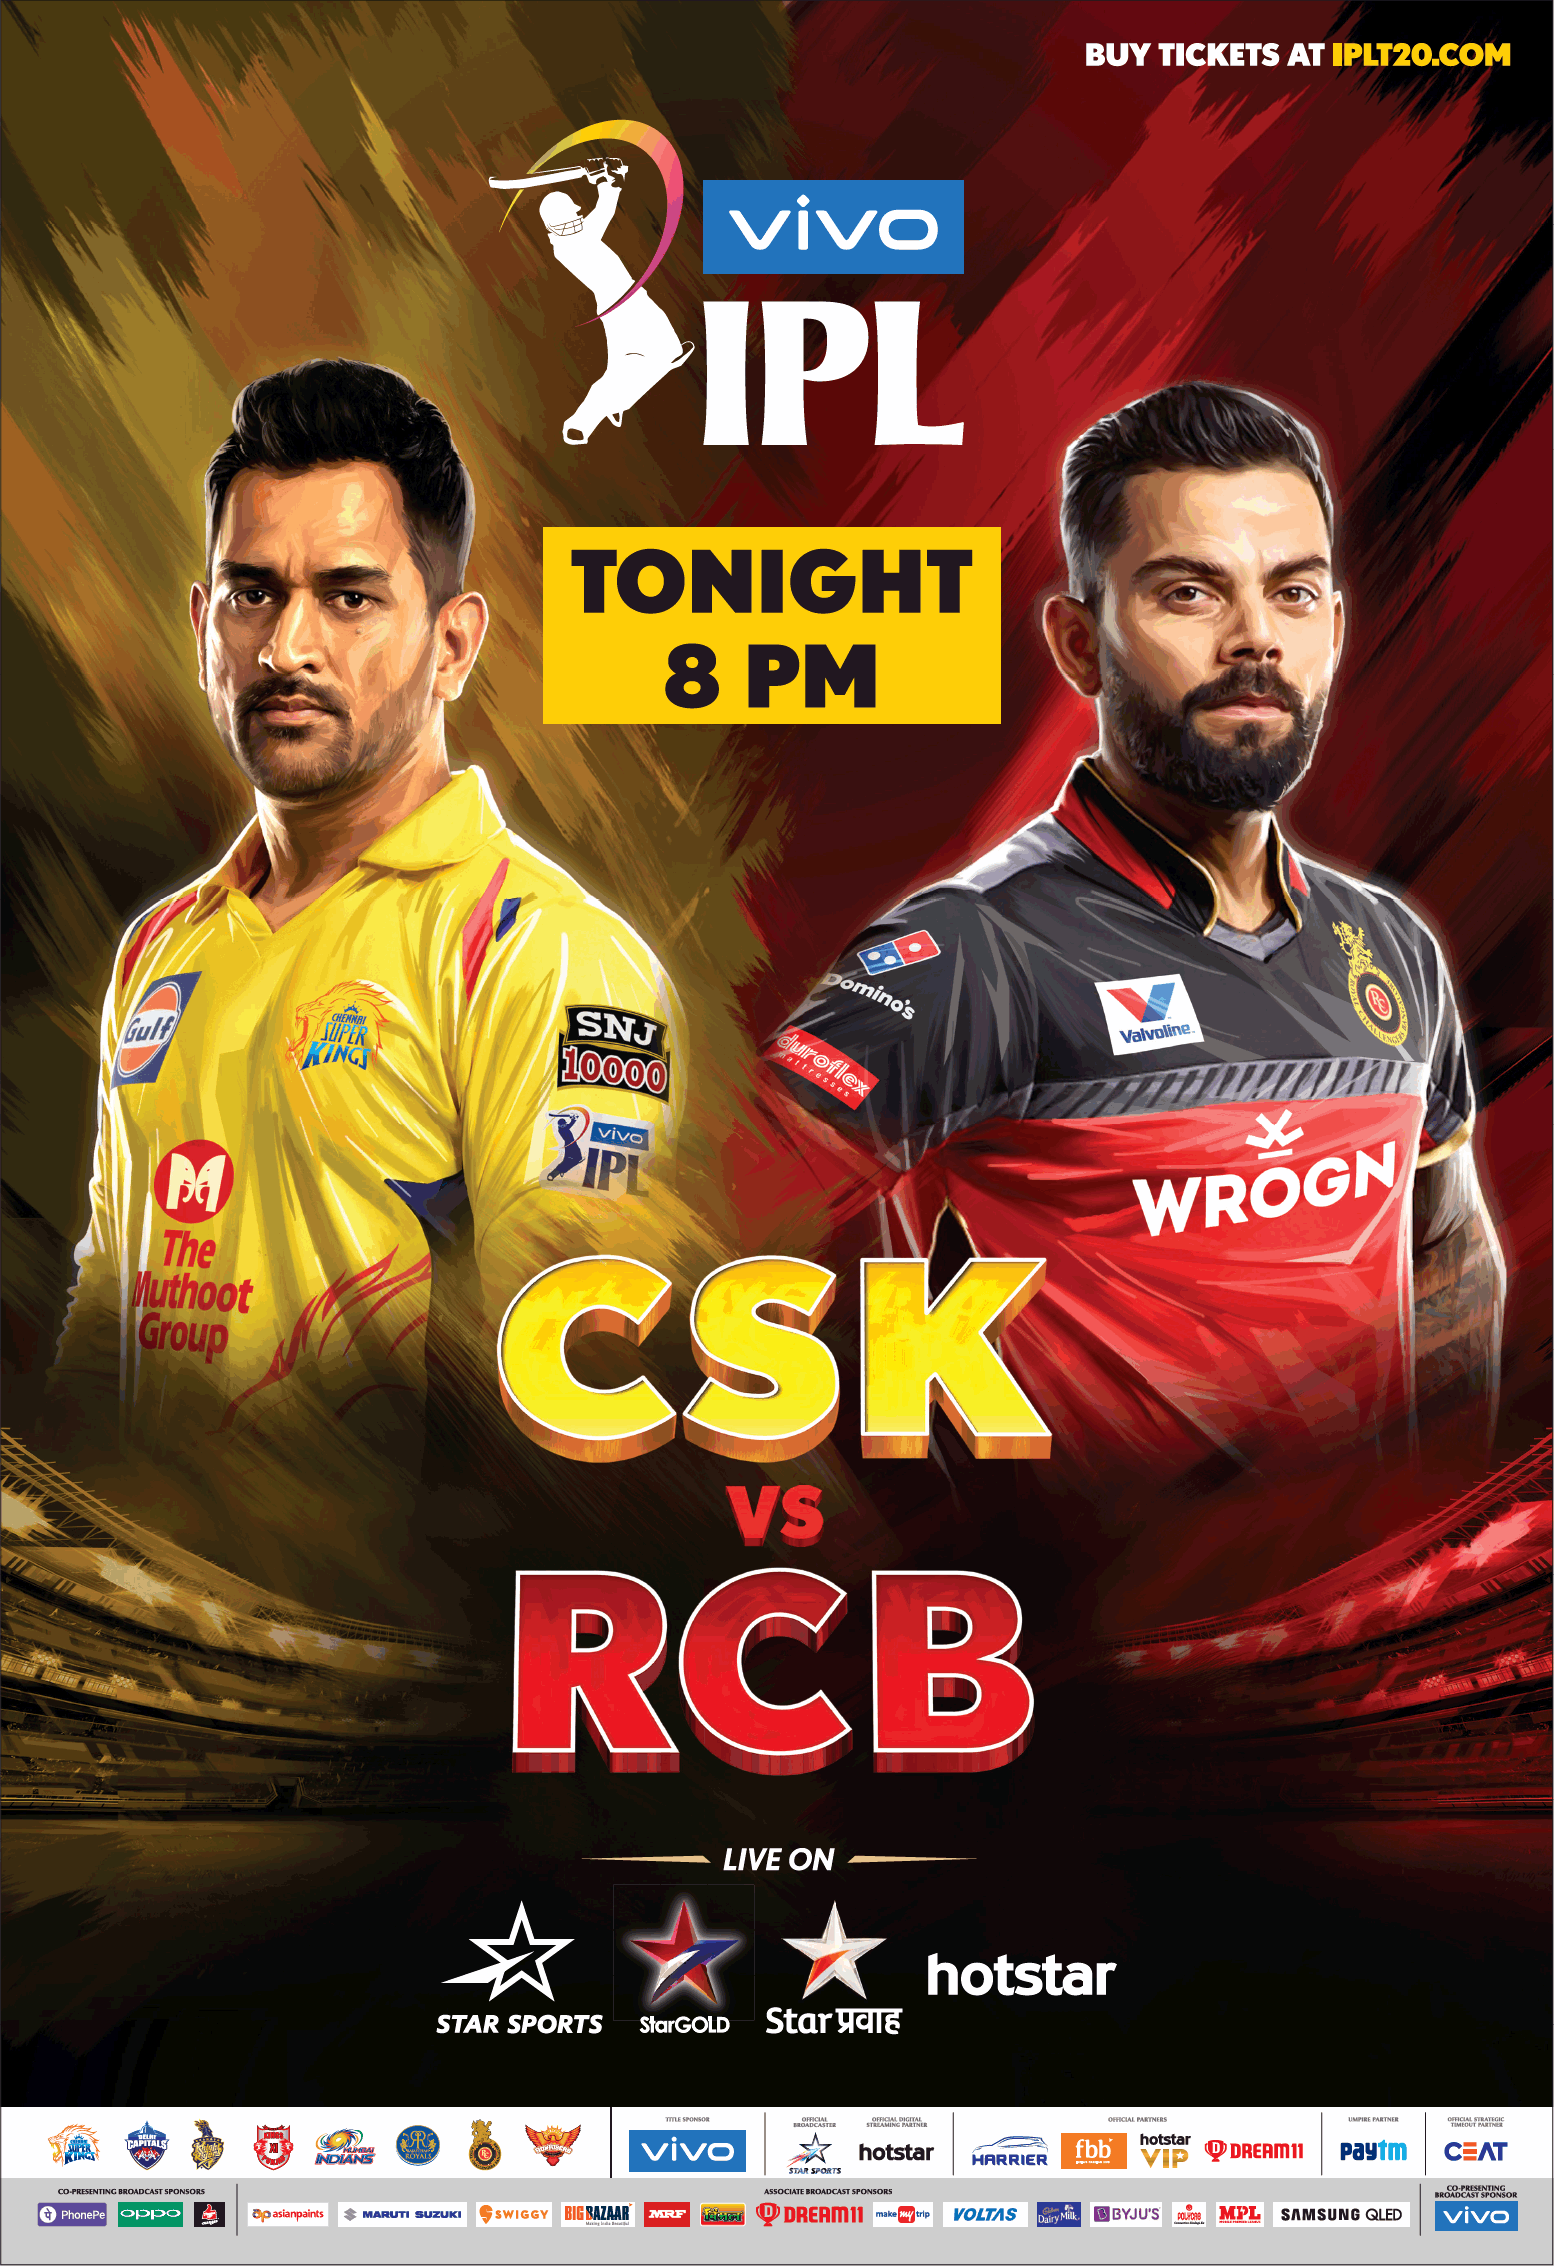 Vivo Ipl Csk And Rcb Live On Tonight 8Pm Ad Advert Gallery